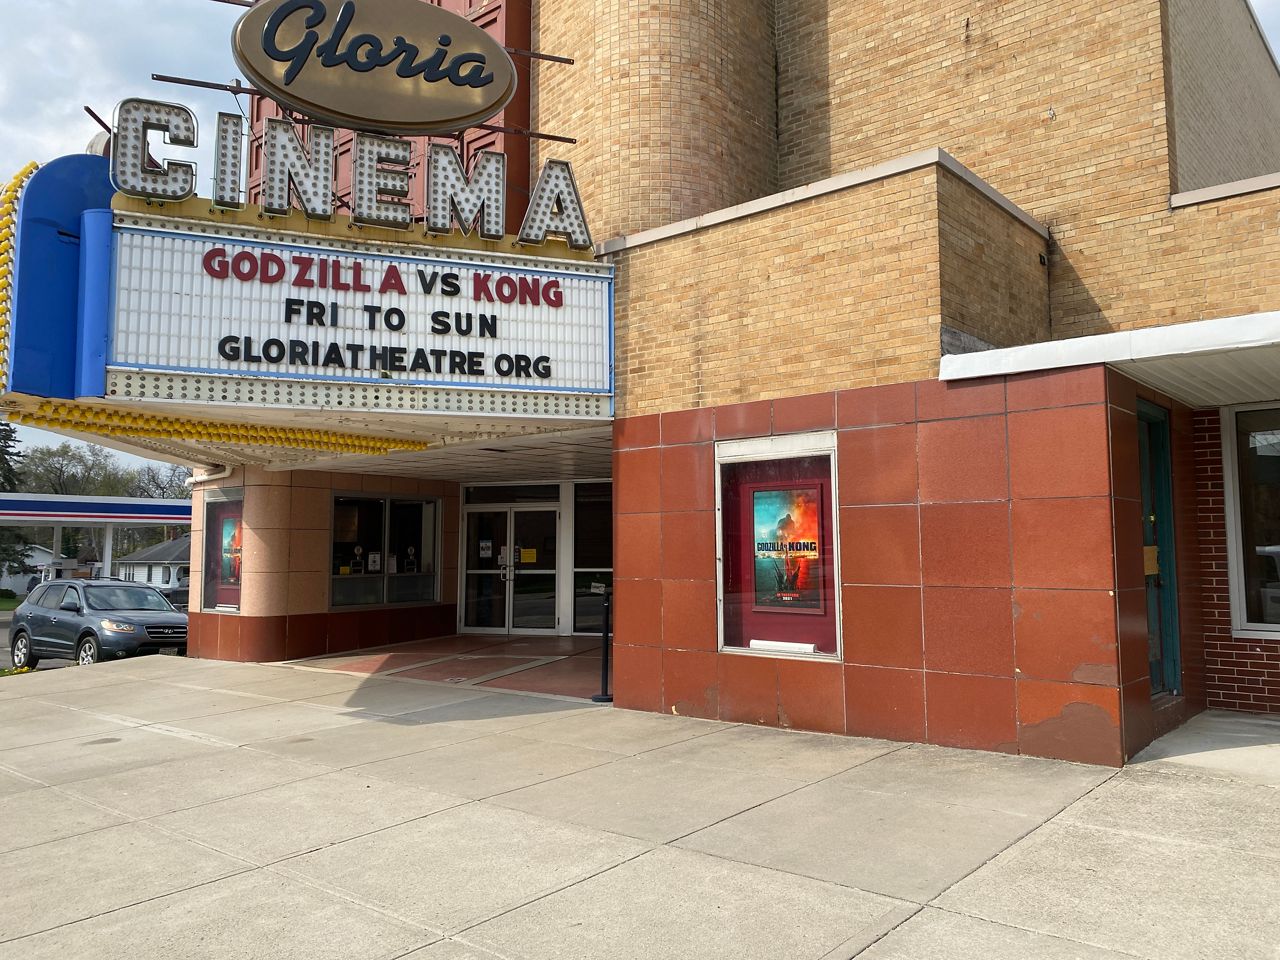 Historic Urbana theater looks to revitalize community with a taste of fun